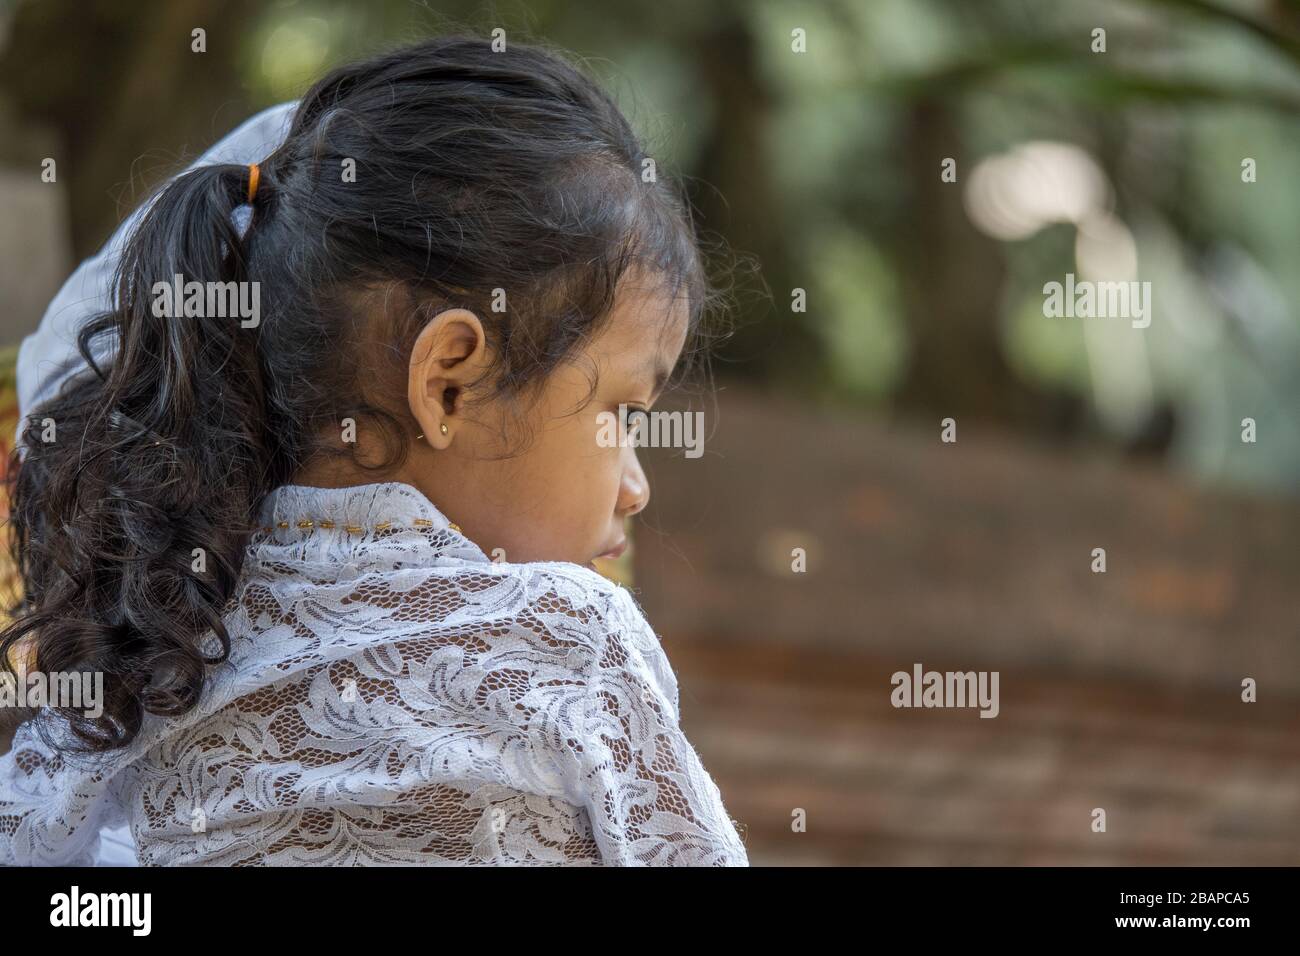 Portrait of little Balinese girl wearing white lace top, black hair pulled back sitting on father's shoulder looking intently into space. Stock Photo